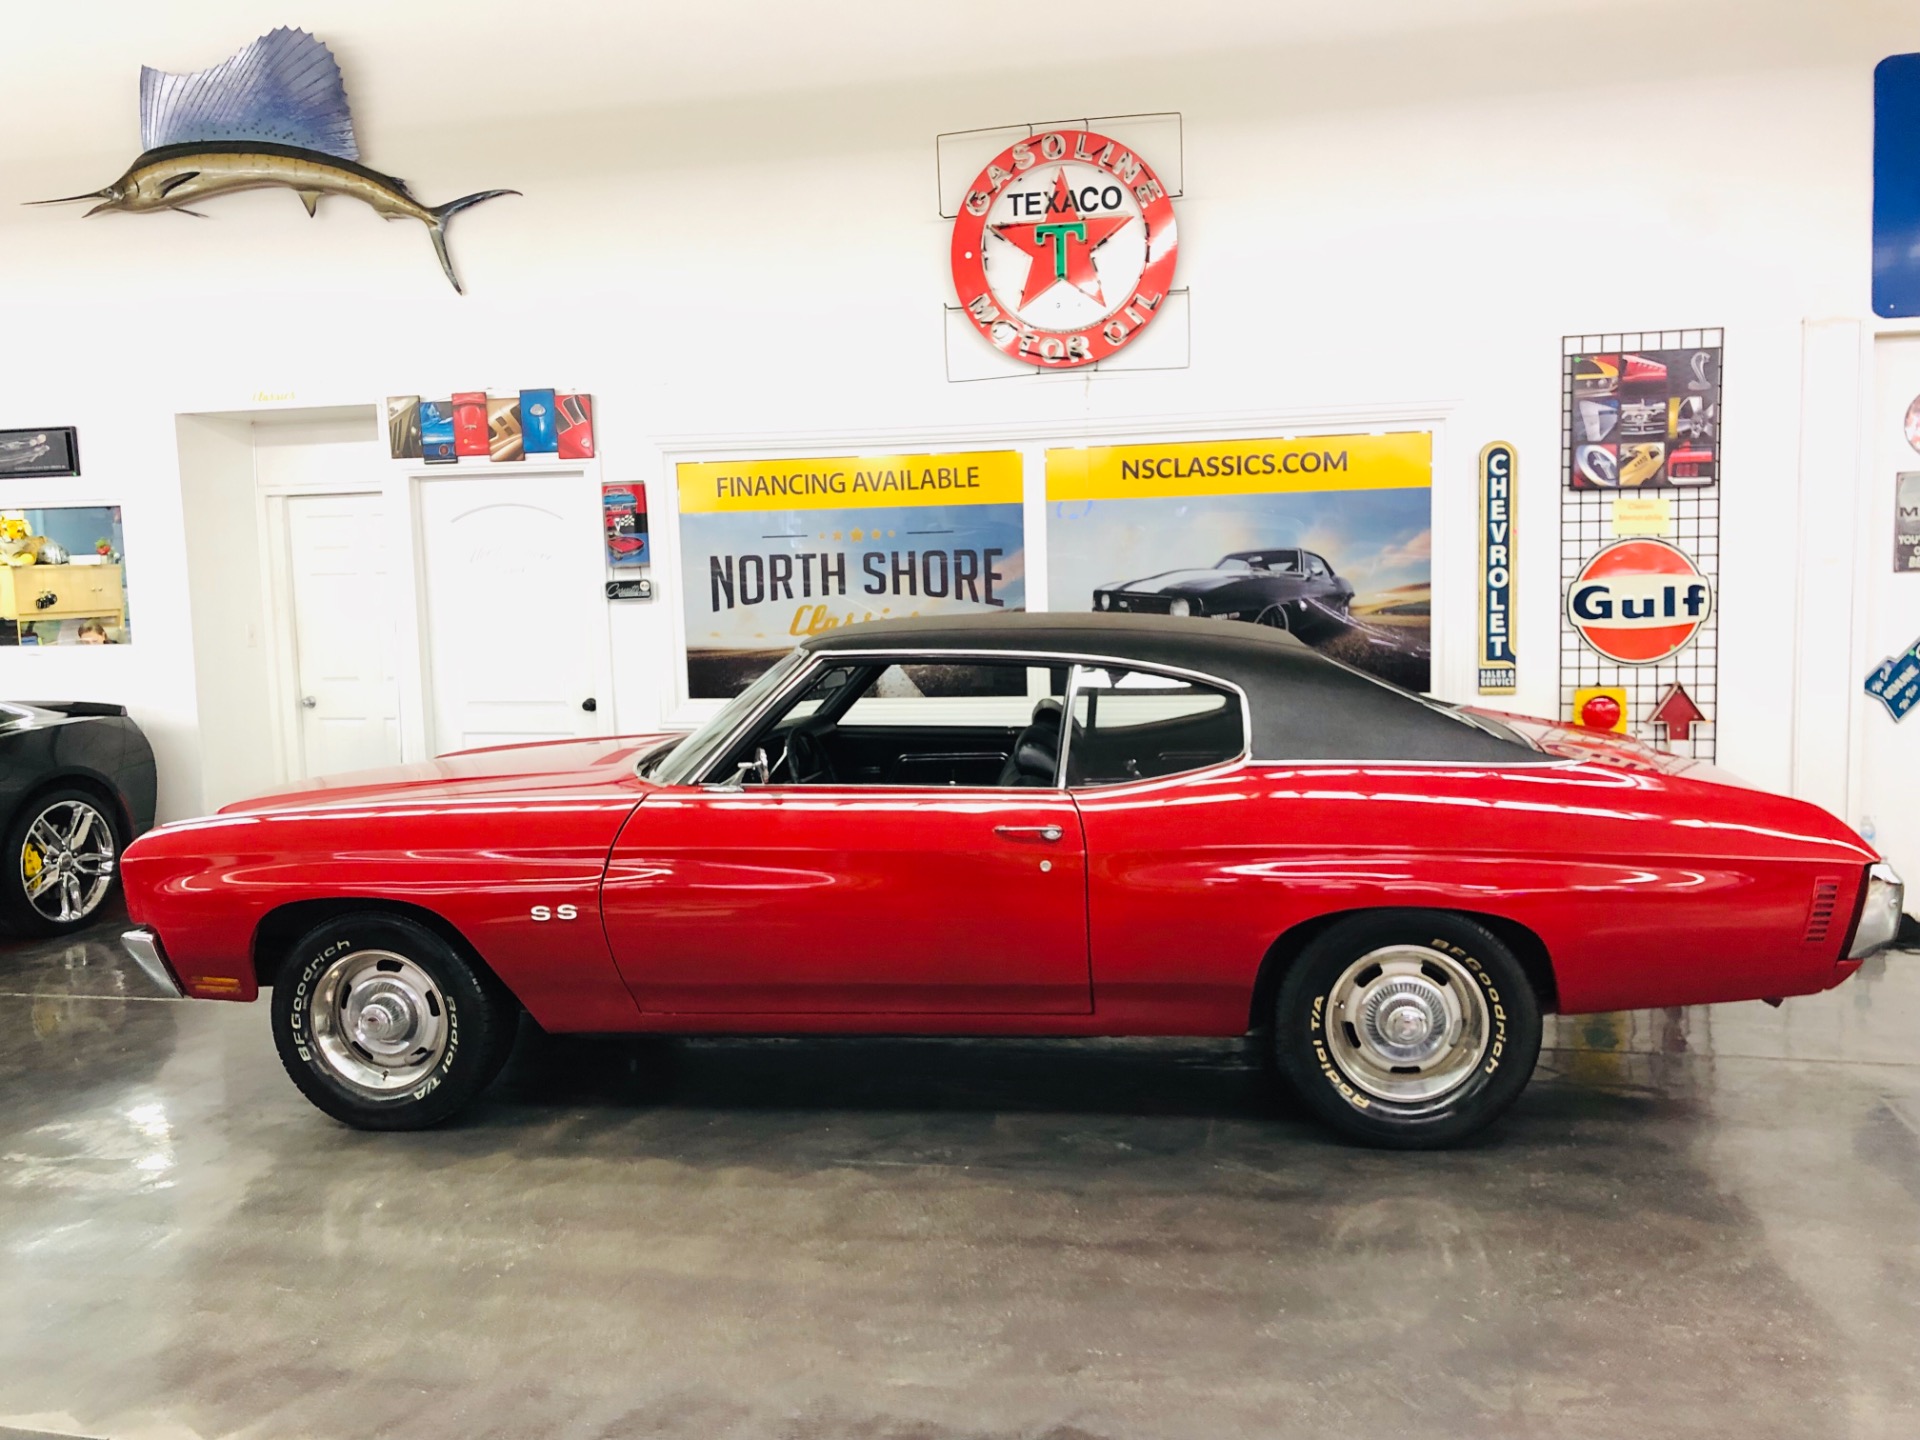 Used 1970 Chevrolet Chevelle -NUMBERS MATCHING-AUTOMATIC-RELIABLE-FINANCING AVAILABLE-LOW PMTS- | Mundelein, IL